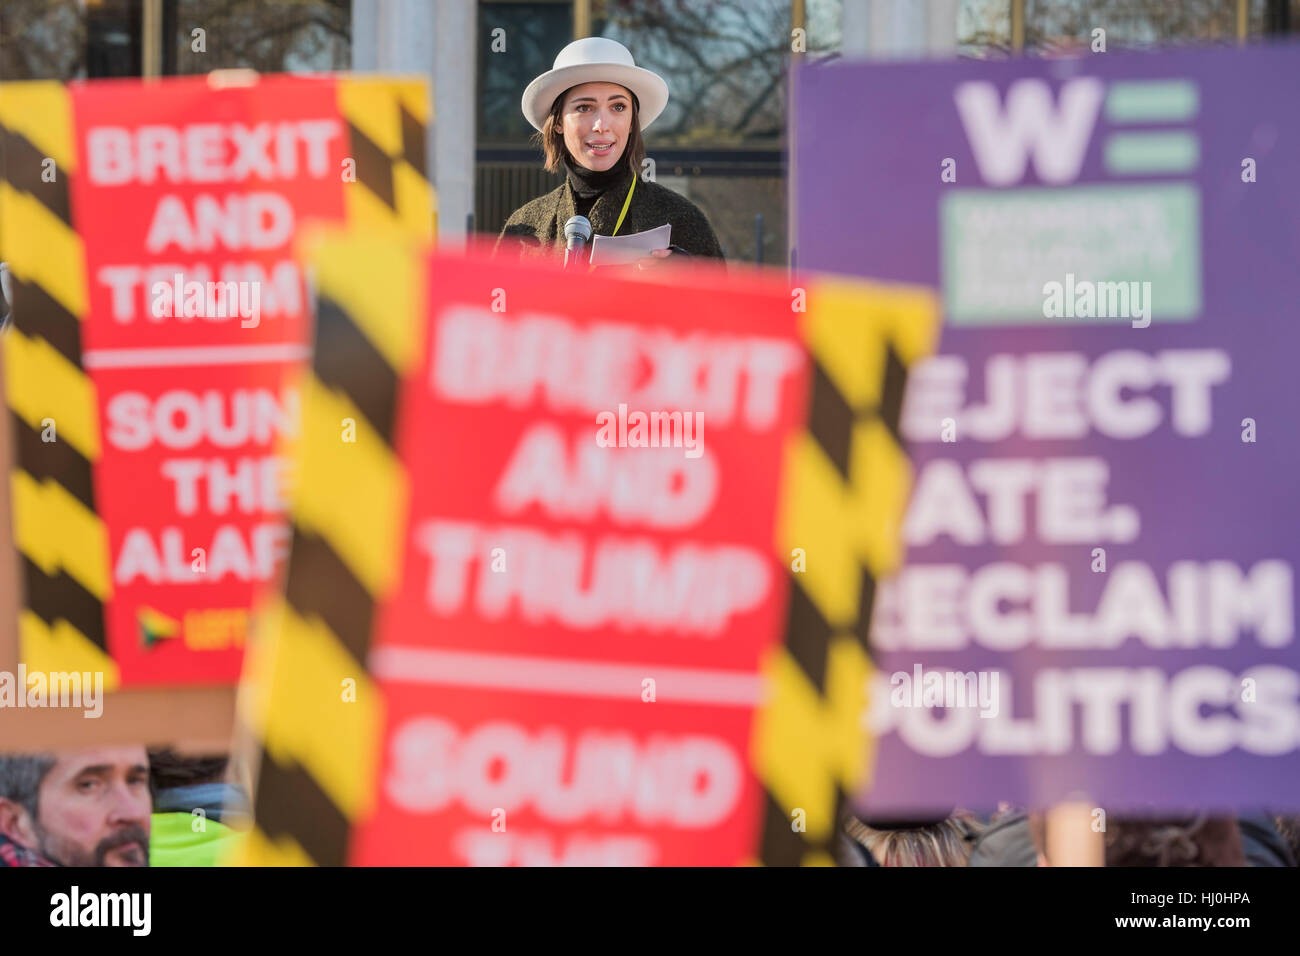 London, UK. 21st January, 2017. Rebecca Hall, actress, introduces speakers outside the US Embassy - Women's March on London - a grassroots movement of women has organised marches around the world to assert the 'positive values that the politics of fear denies' on the first day of Donald Trump’s Presidency. Their supporters include: Amnesty International, Greenpeace, ActionAid UK, Oxfam GB, The Green Party, Pride London, Unite the Union, NUS, 50:50 Parliament, Stop The War Coalition, CND. Credit: Guy Bell/Alamy Live News Stock Photo